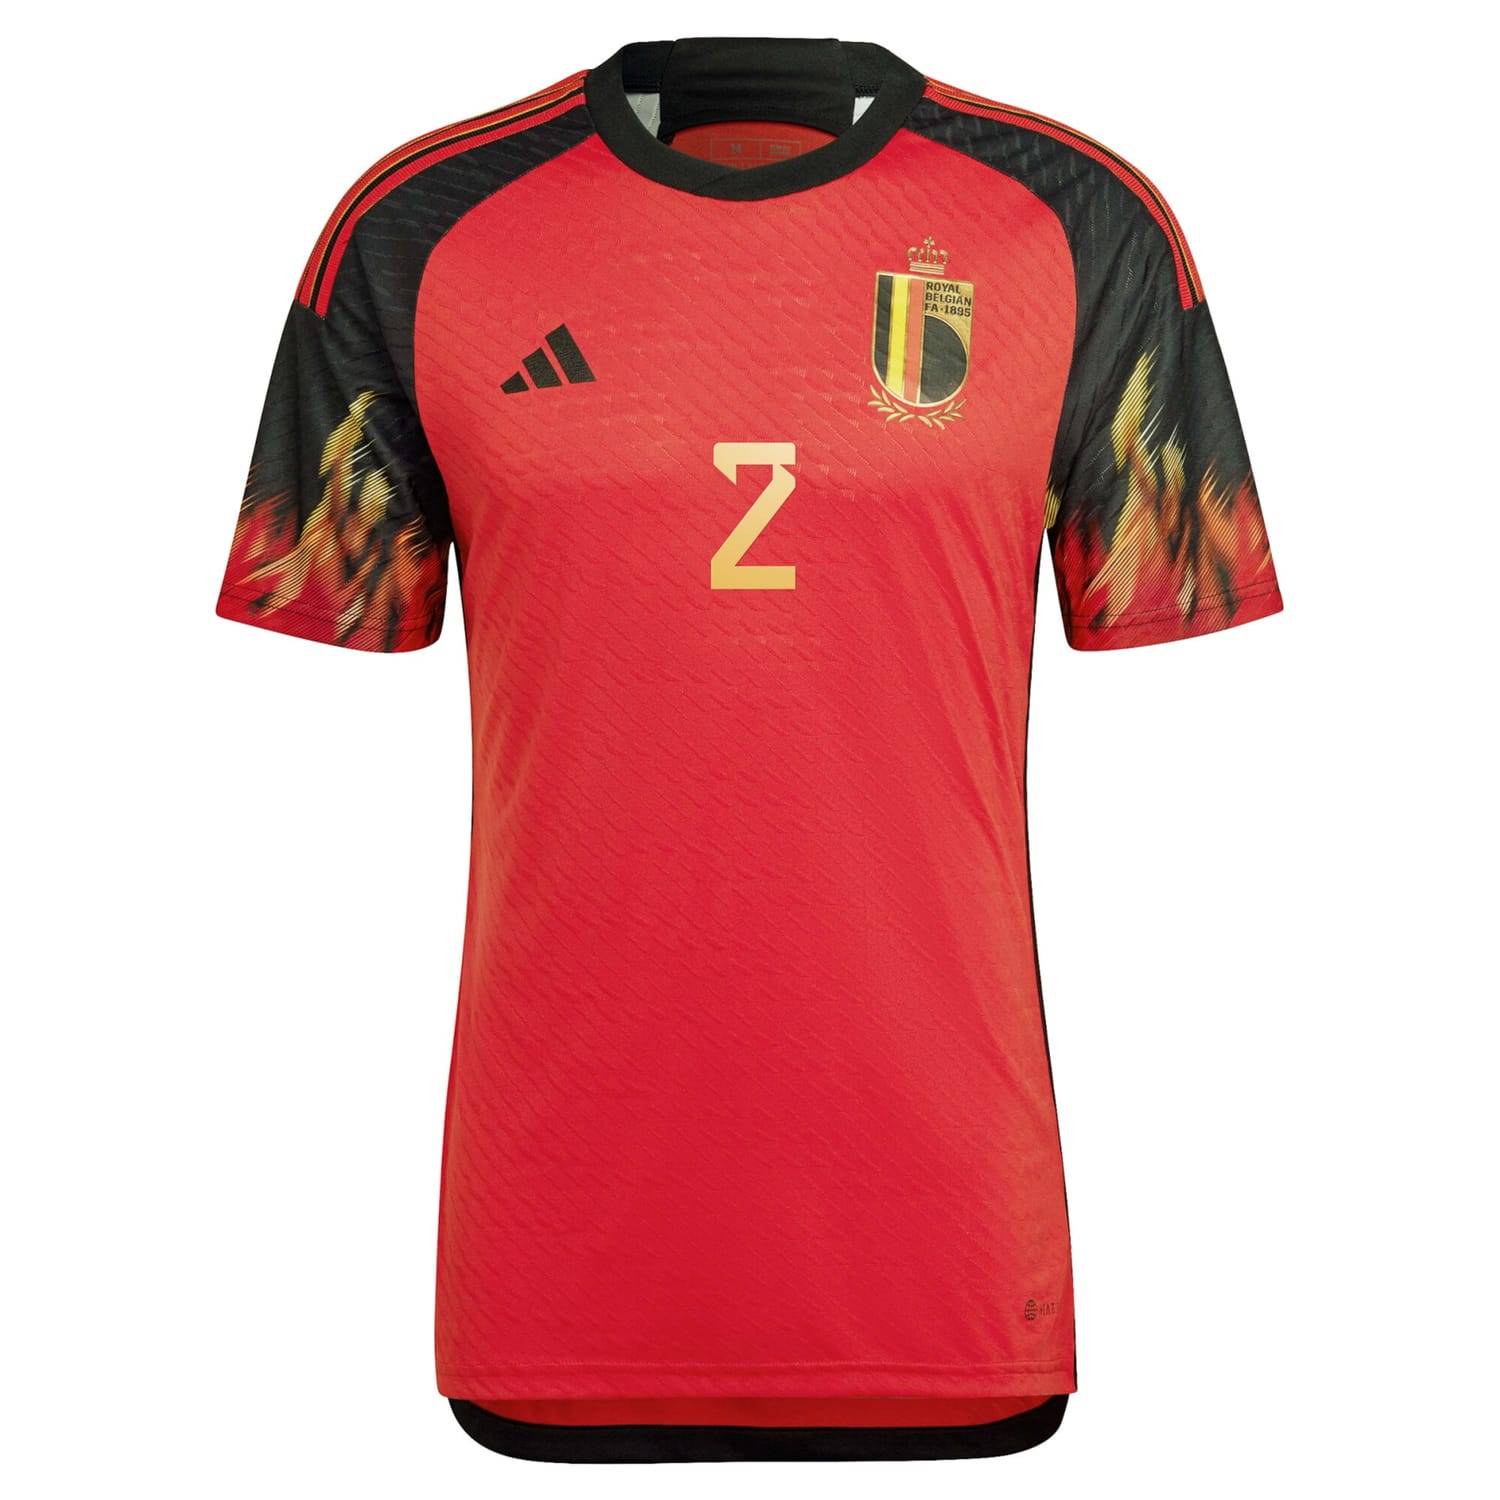 Belgium National Team Home Authentic Jersey Shirt 2022 player Toby Alderweireld 2 printing for Men